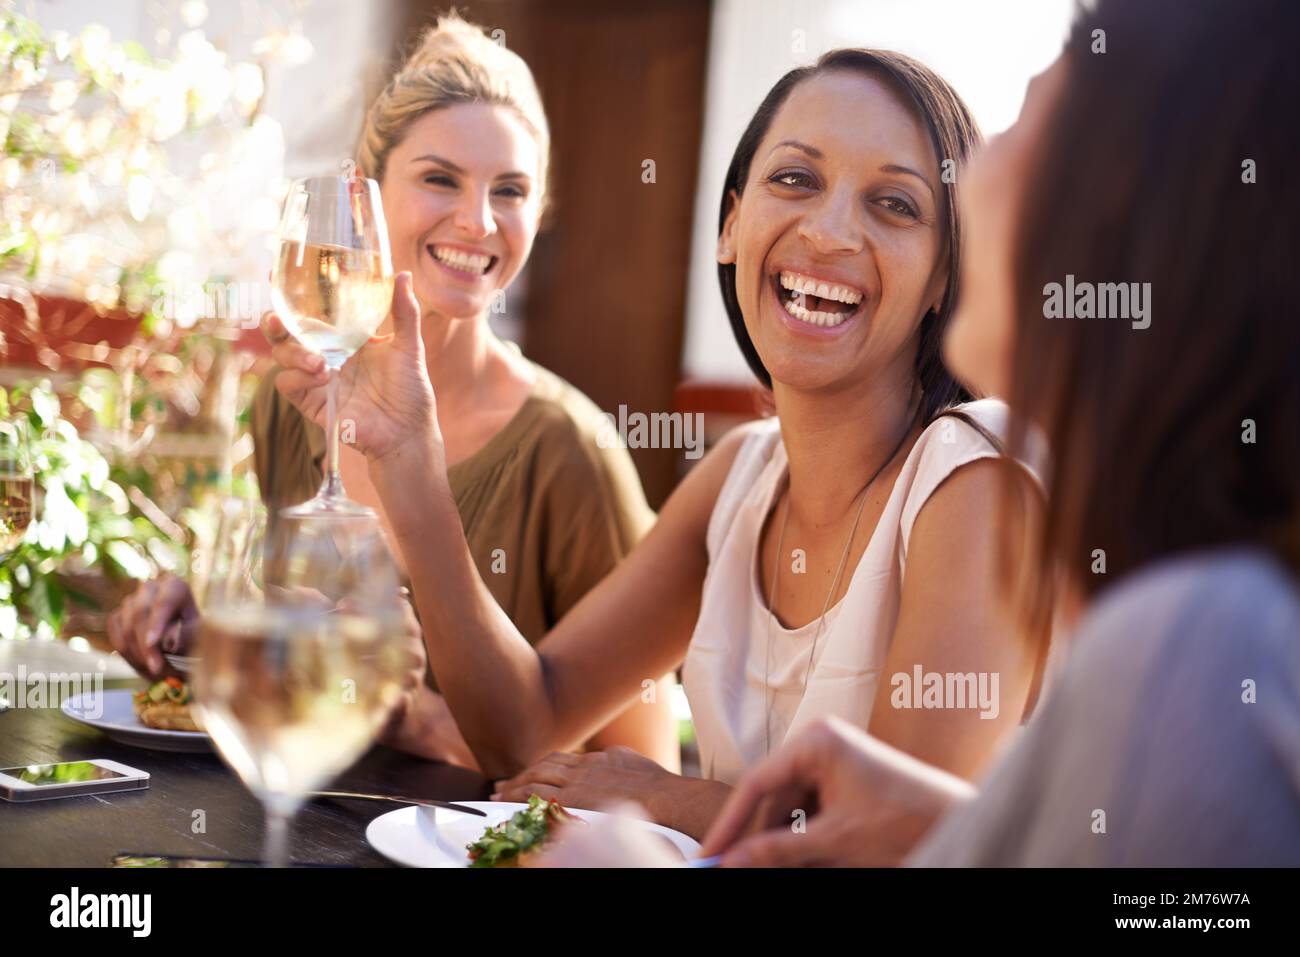 Girls just wanna have fun. a happy group of friends having a drink together. Stock Photo